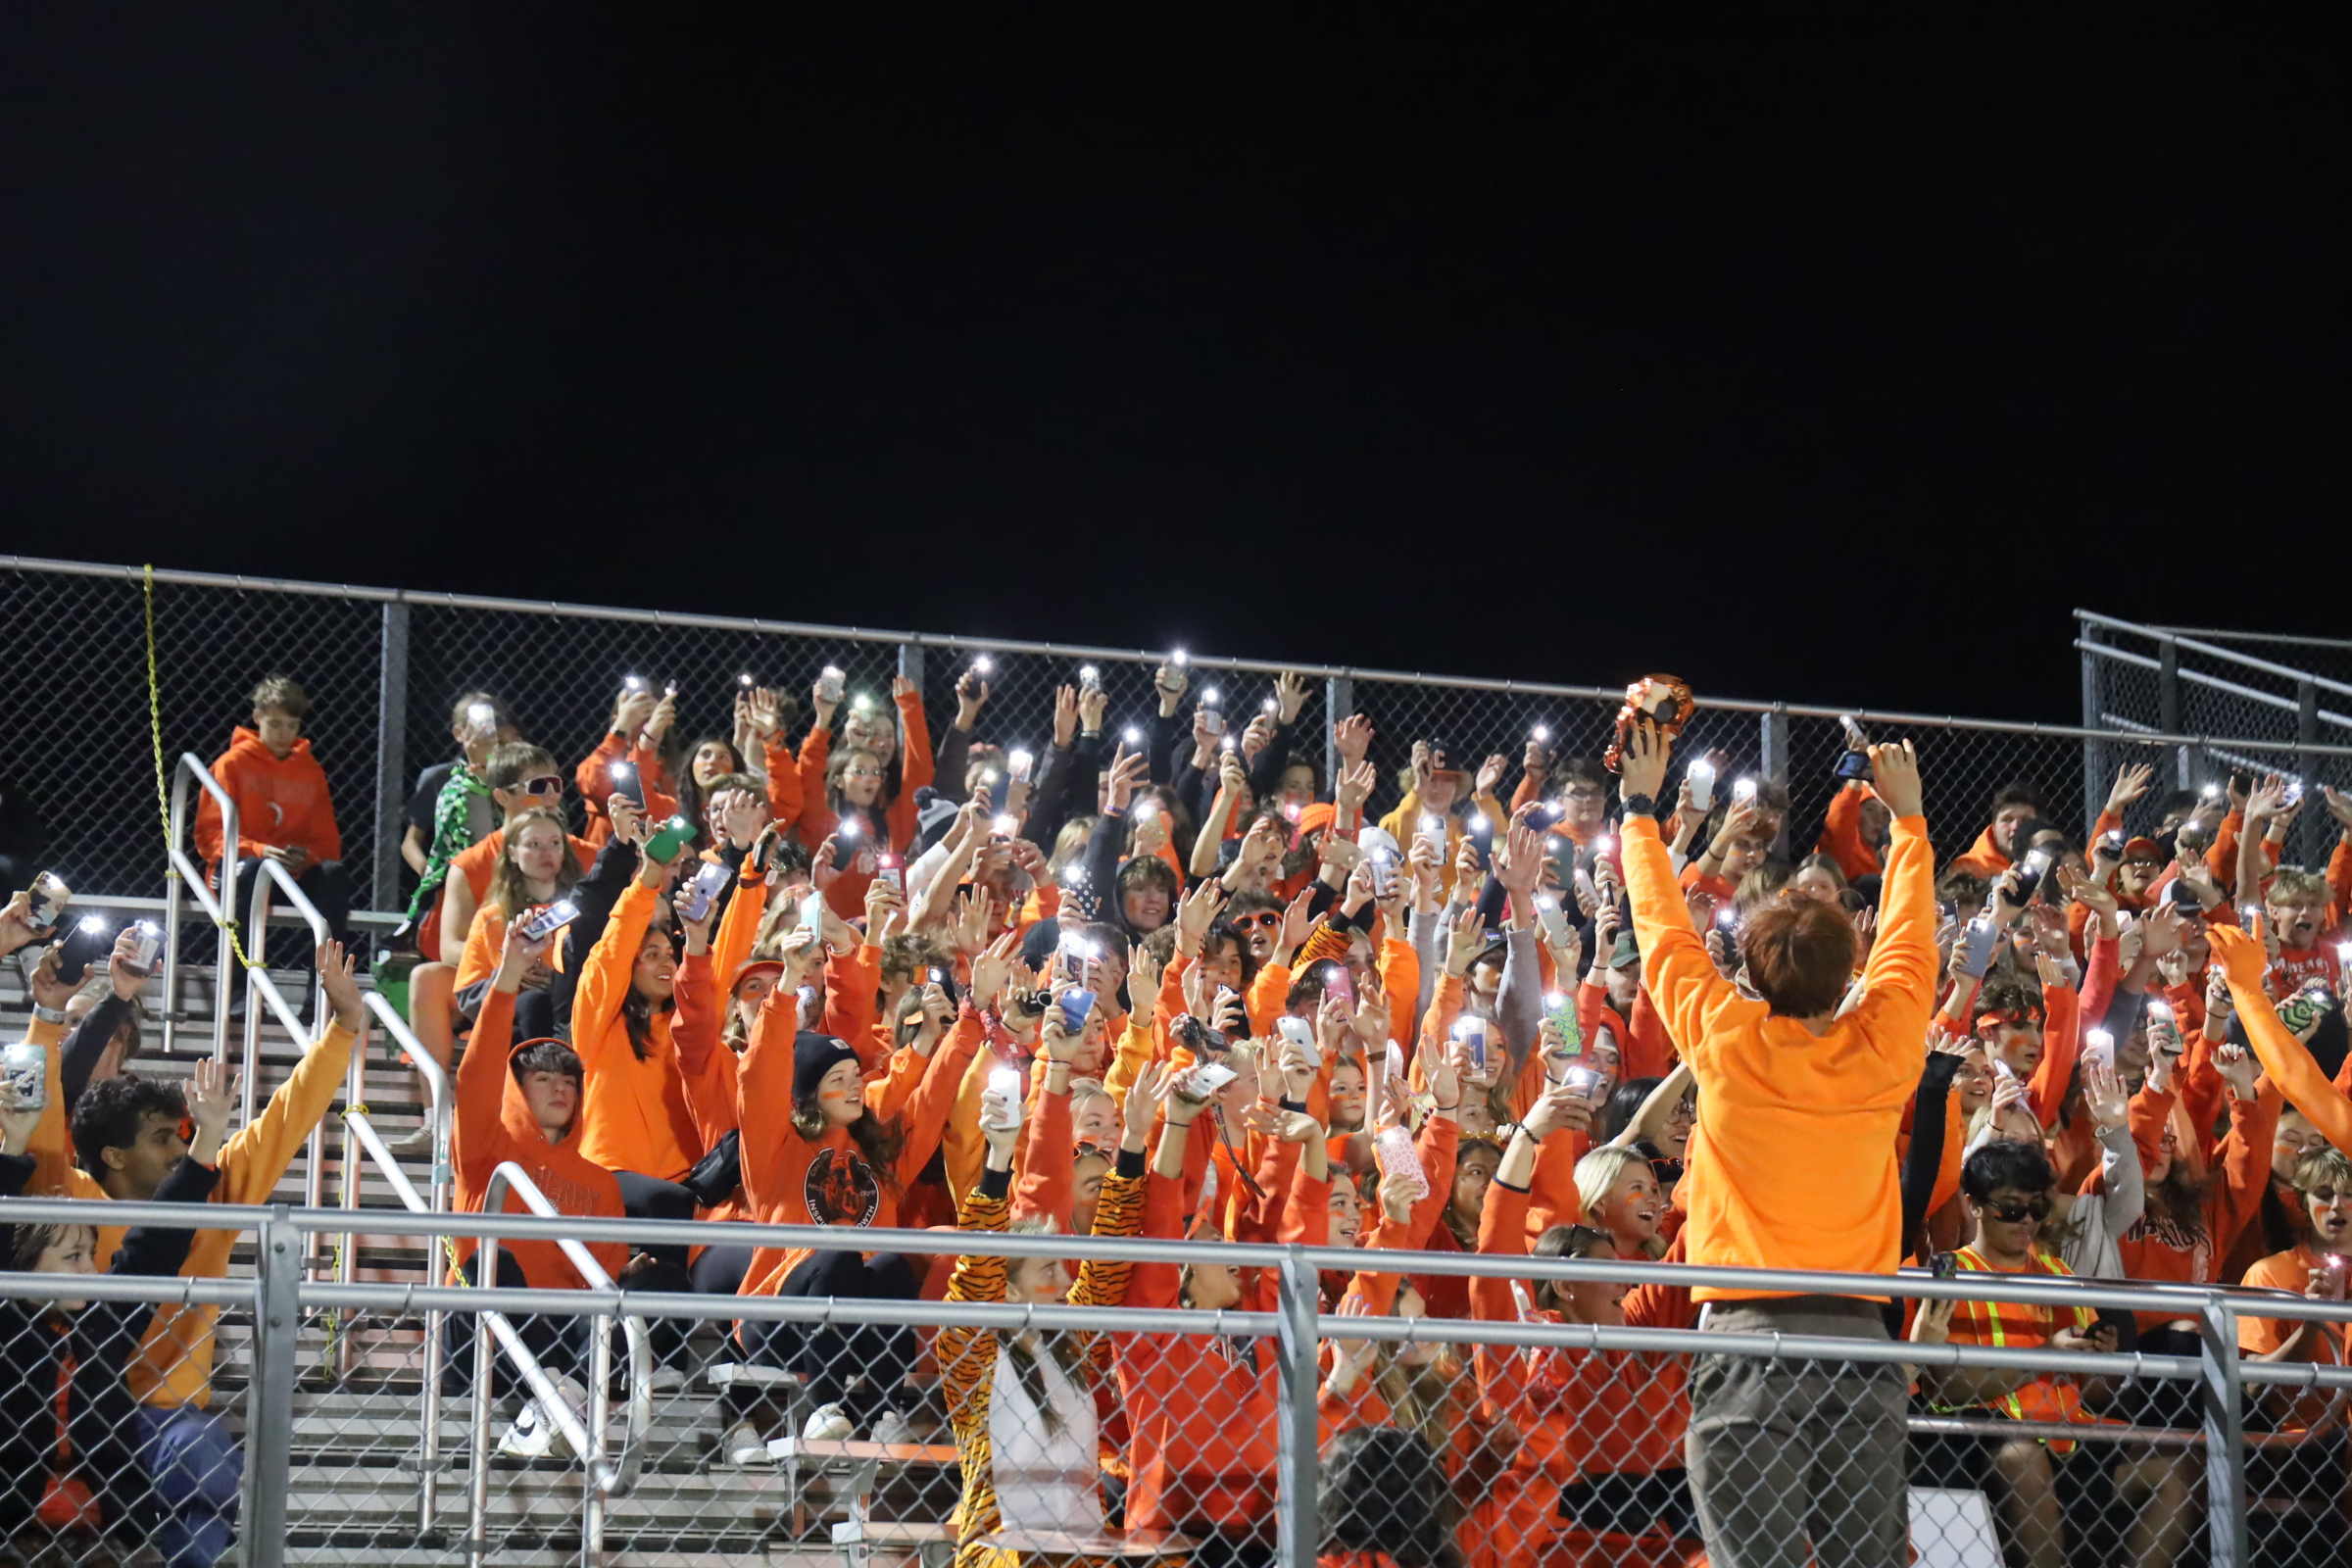 Fans all in orange in the stands